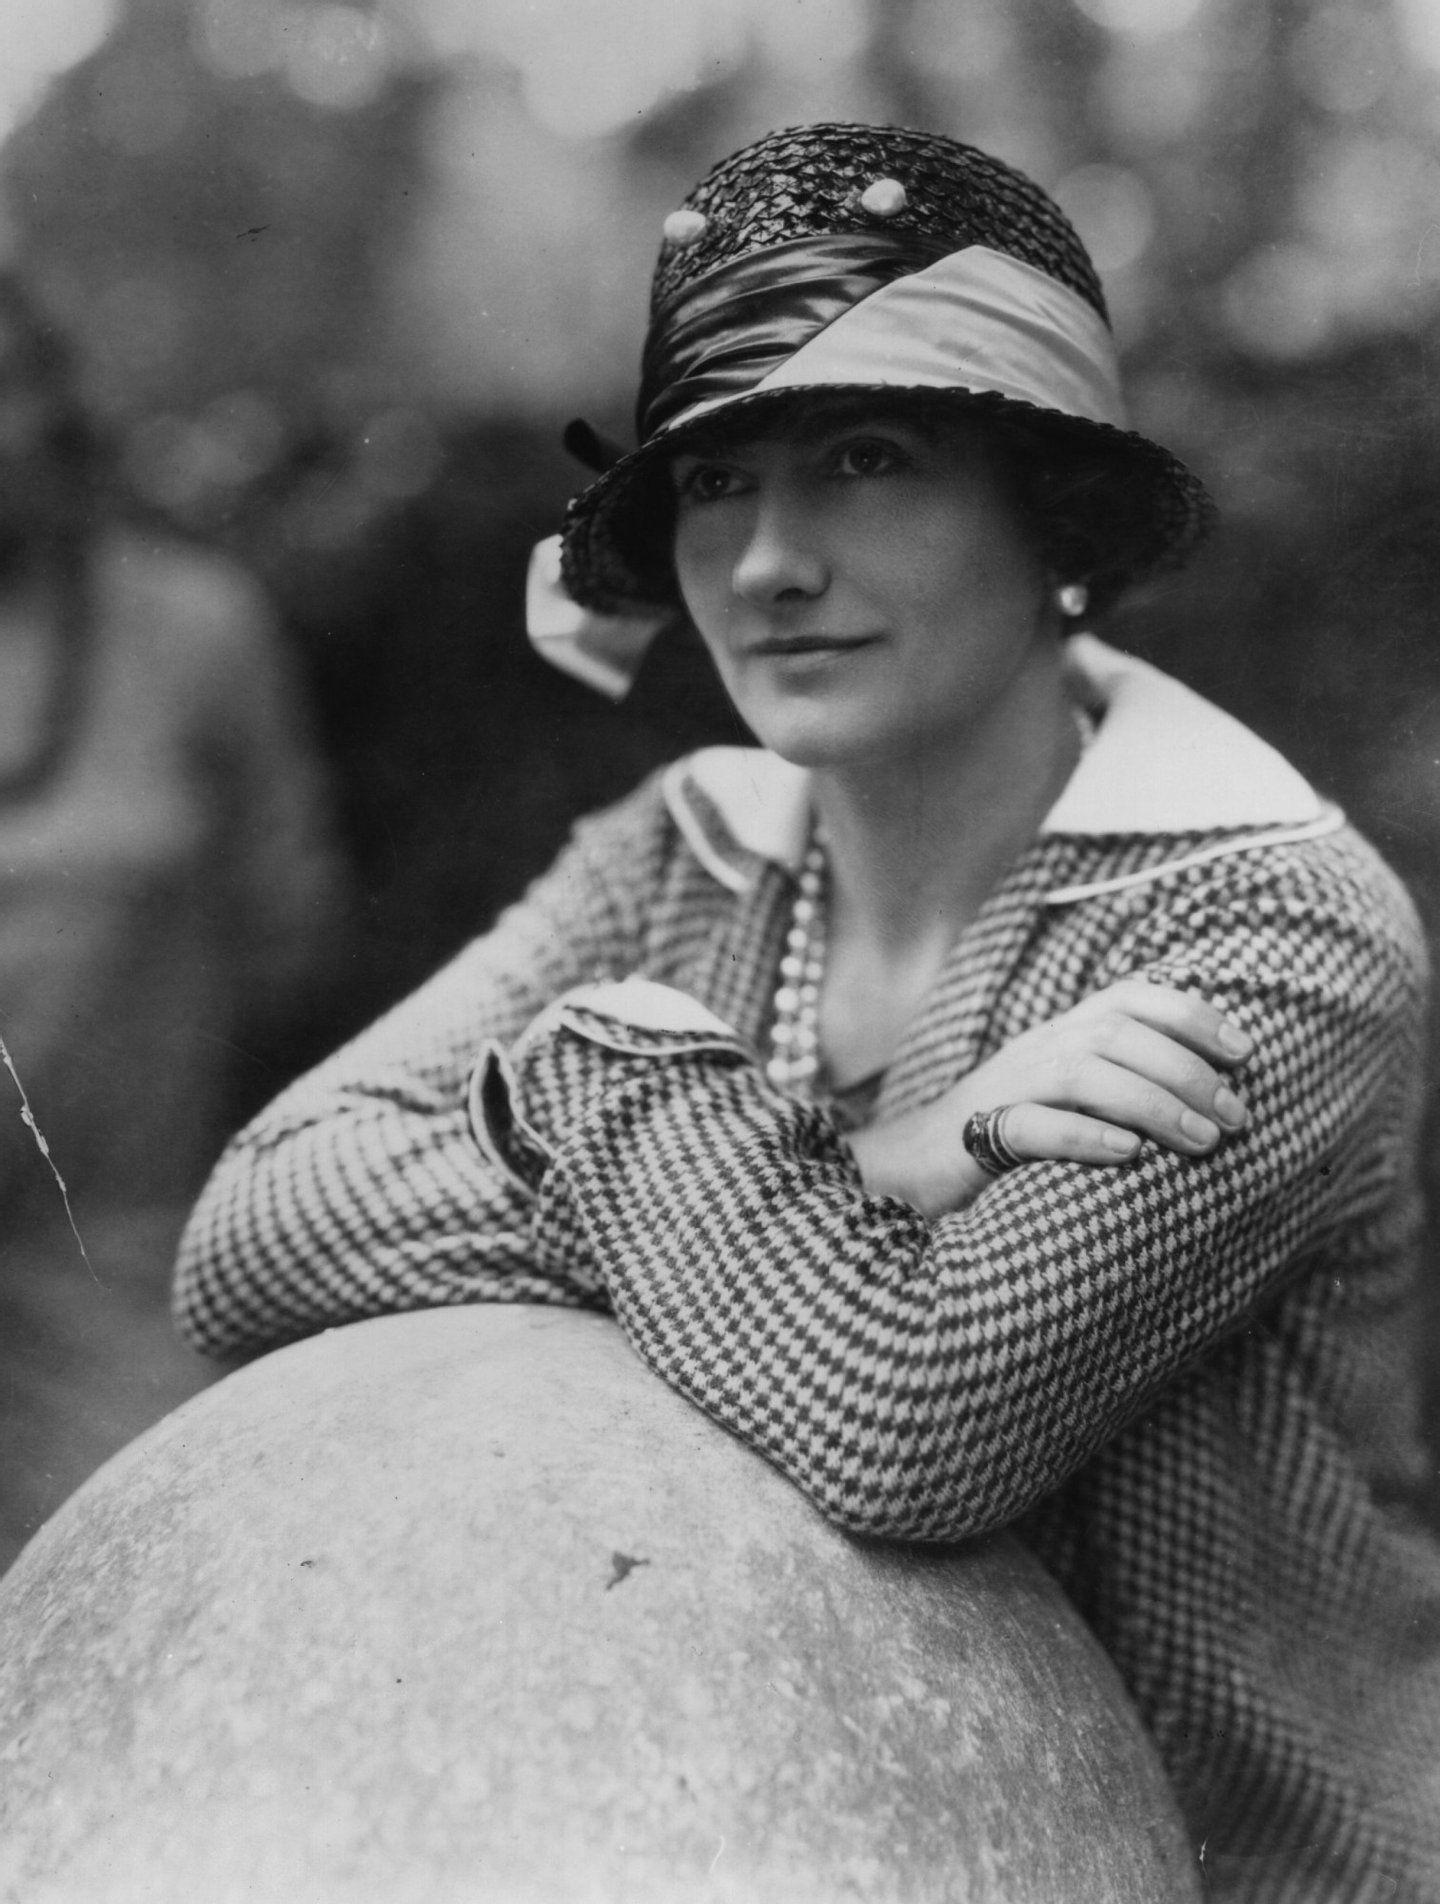 Gabrielle Chanel, known as Coco (1883 - 1971), top French couturier, at Fauborg, St Honore, Paris. (Photo by Sasha/Getty Images)